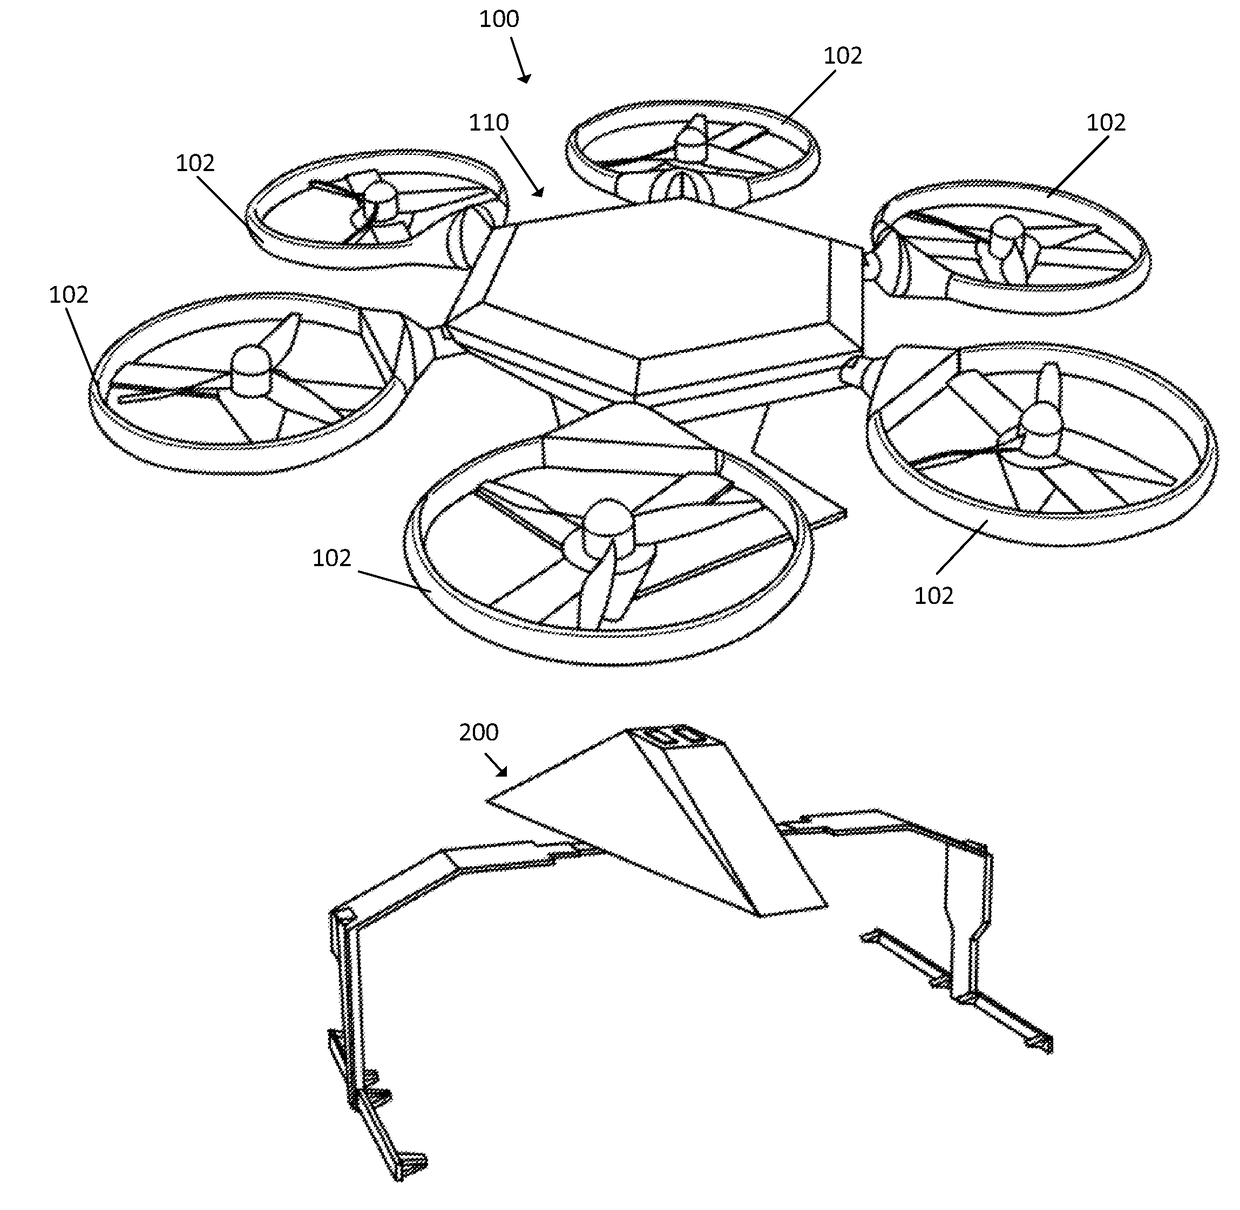 Unmanned aerial vehicle including a removable power source